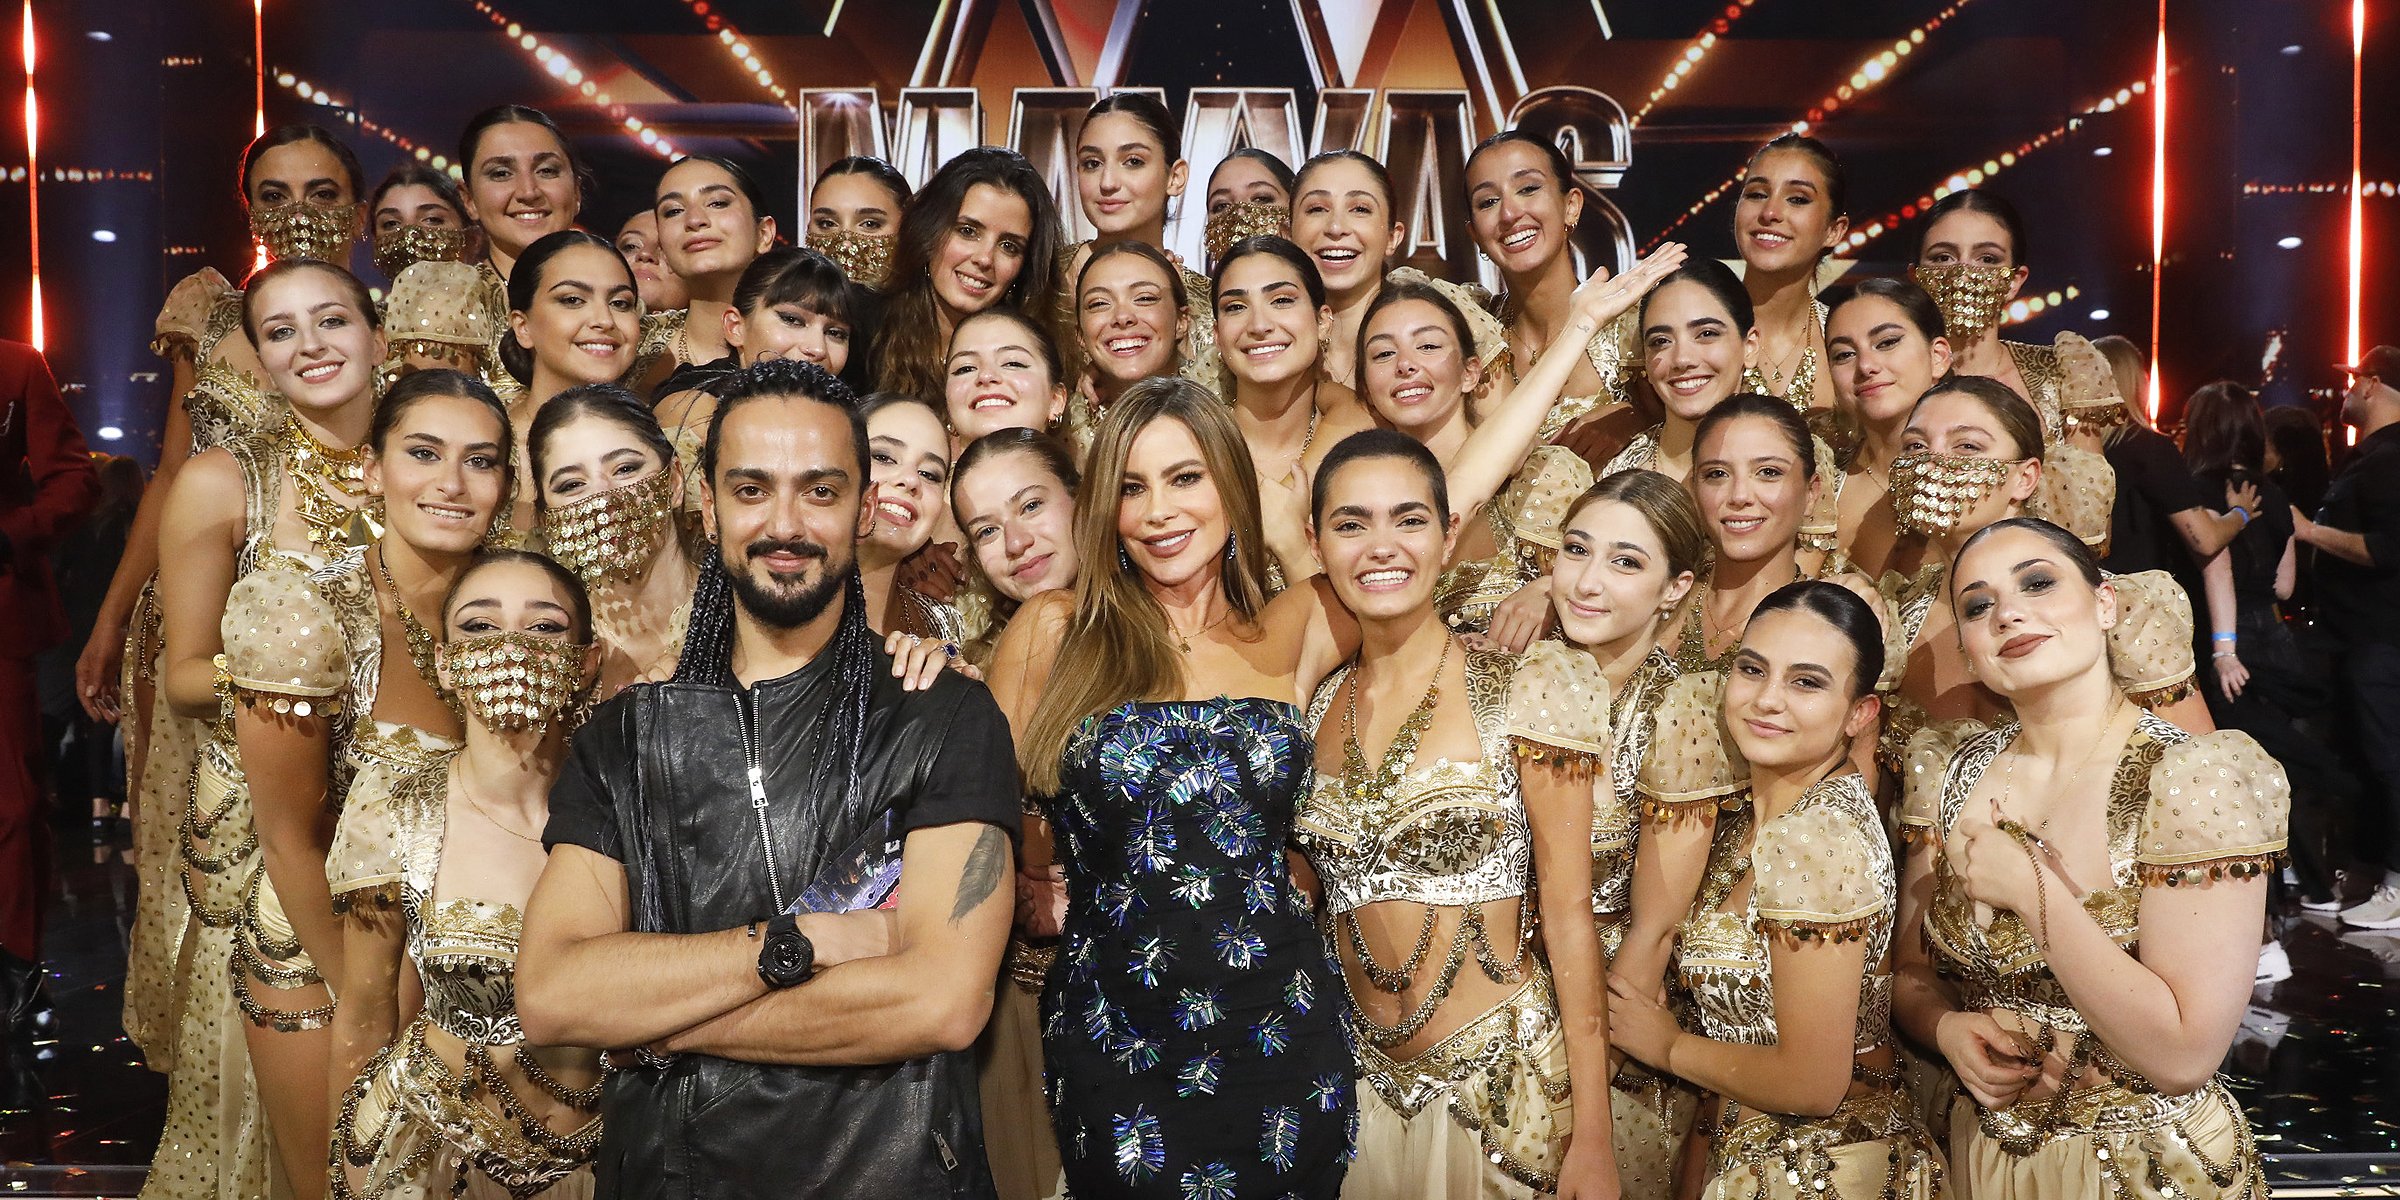 Founder Nadim Cherfan with AGT Season 17 Winners, The Mayyas, Pose with Actress Sofia Vergara | Source: Getty Images